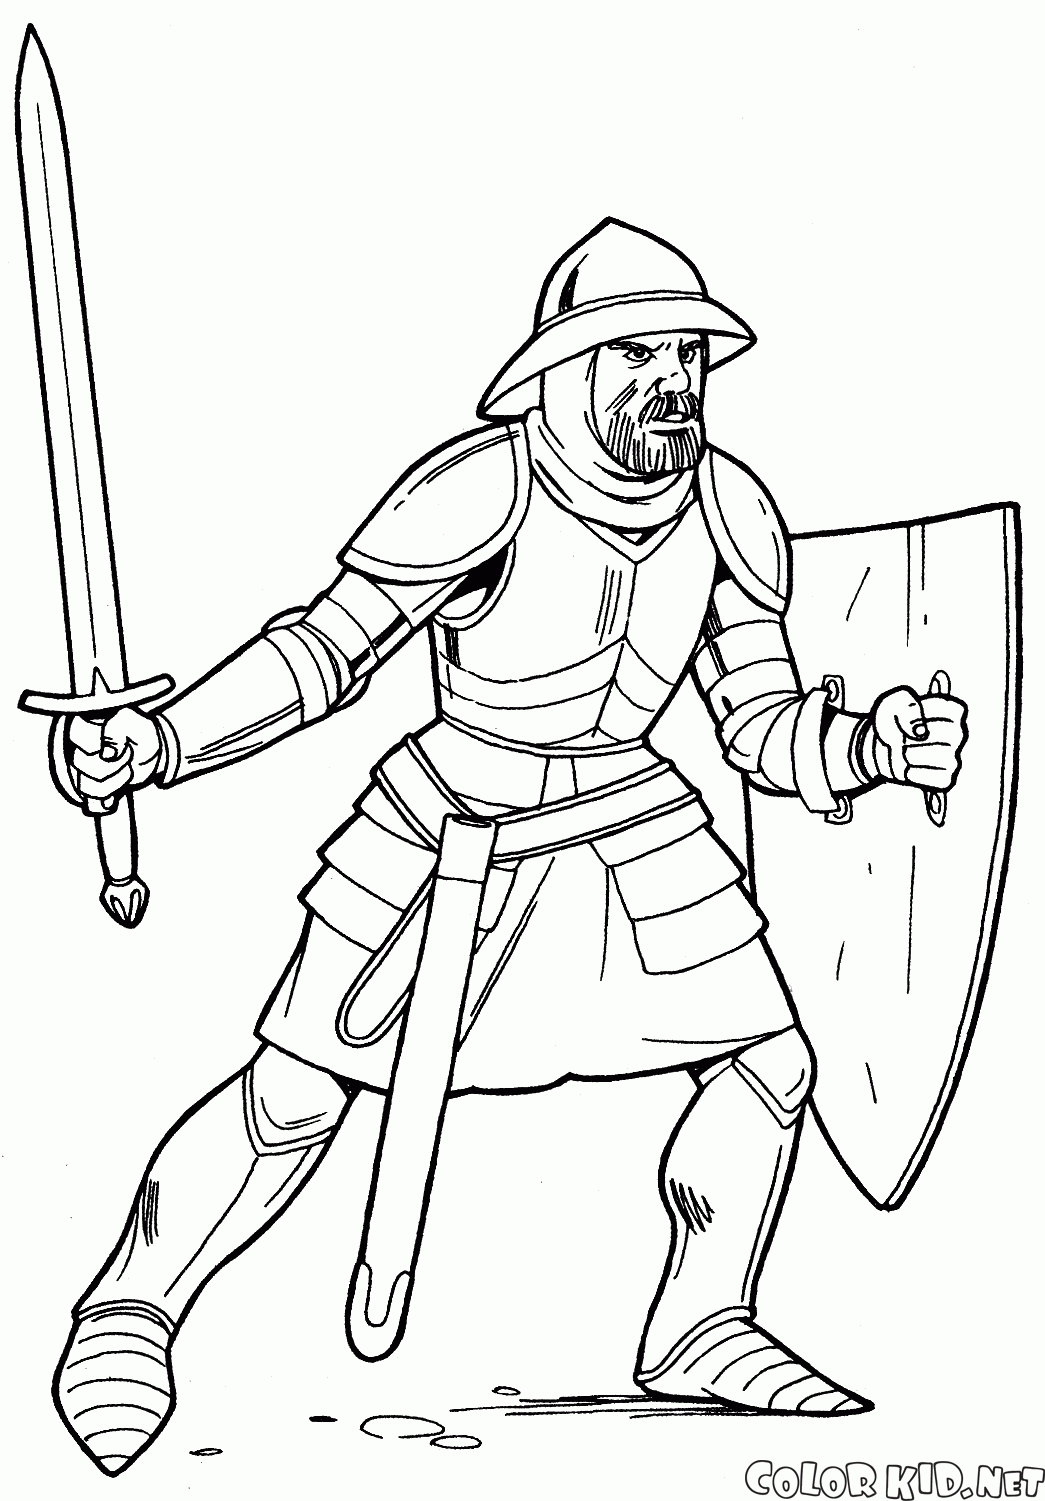 knight coloring page knight coloring pages getcoloringpagescom knight page coloring 1 1